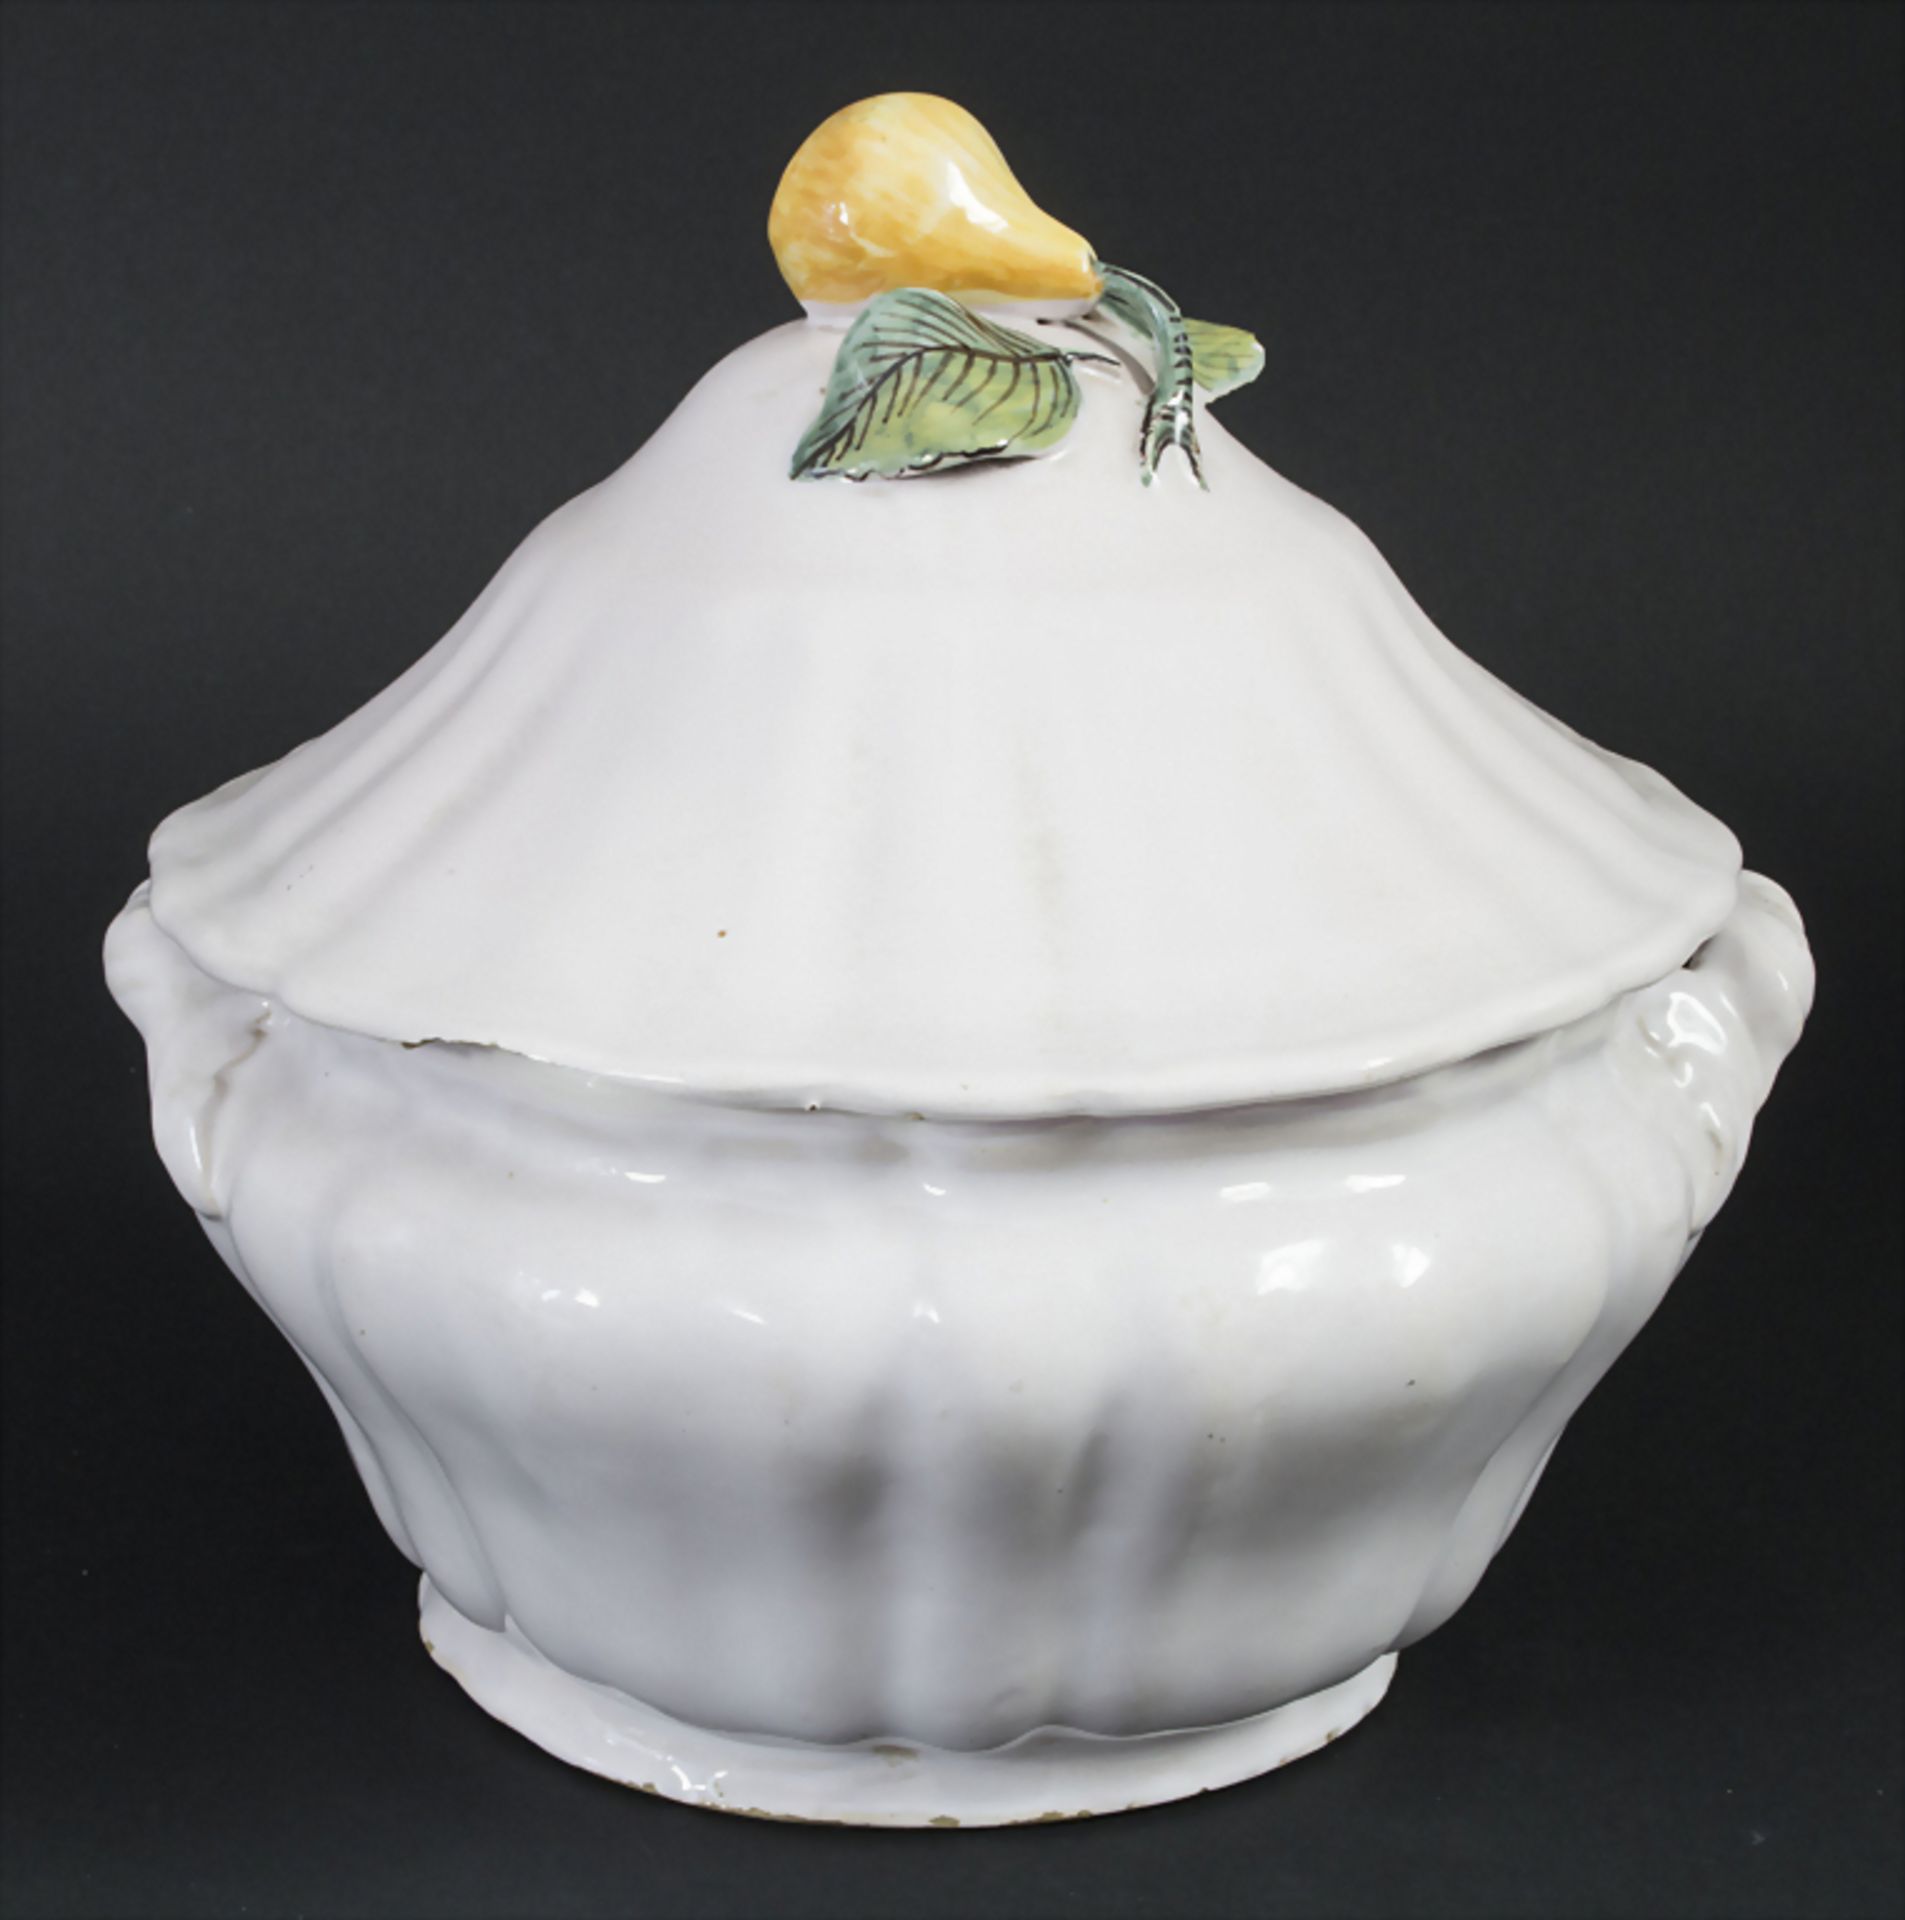 Fayence-Deckelterrine mit Birnknauf / A faience tureen and cover with pear knob, um 1800<br